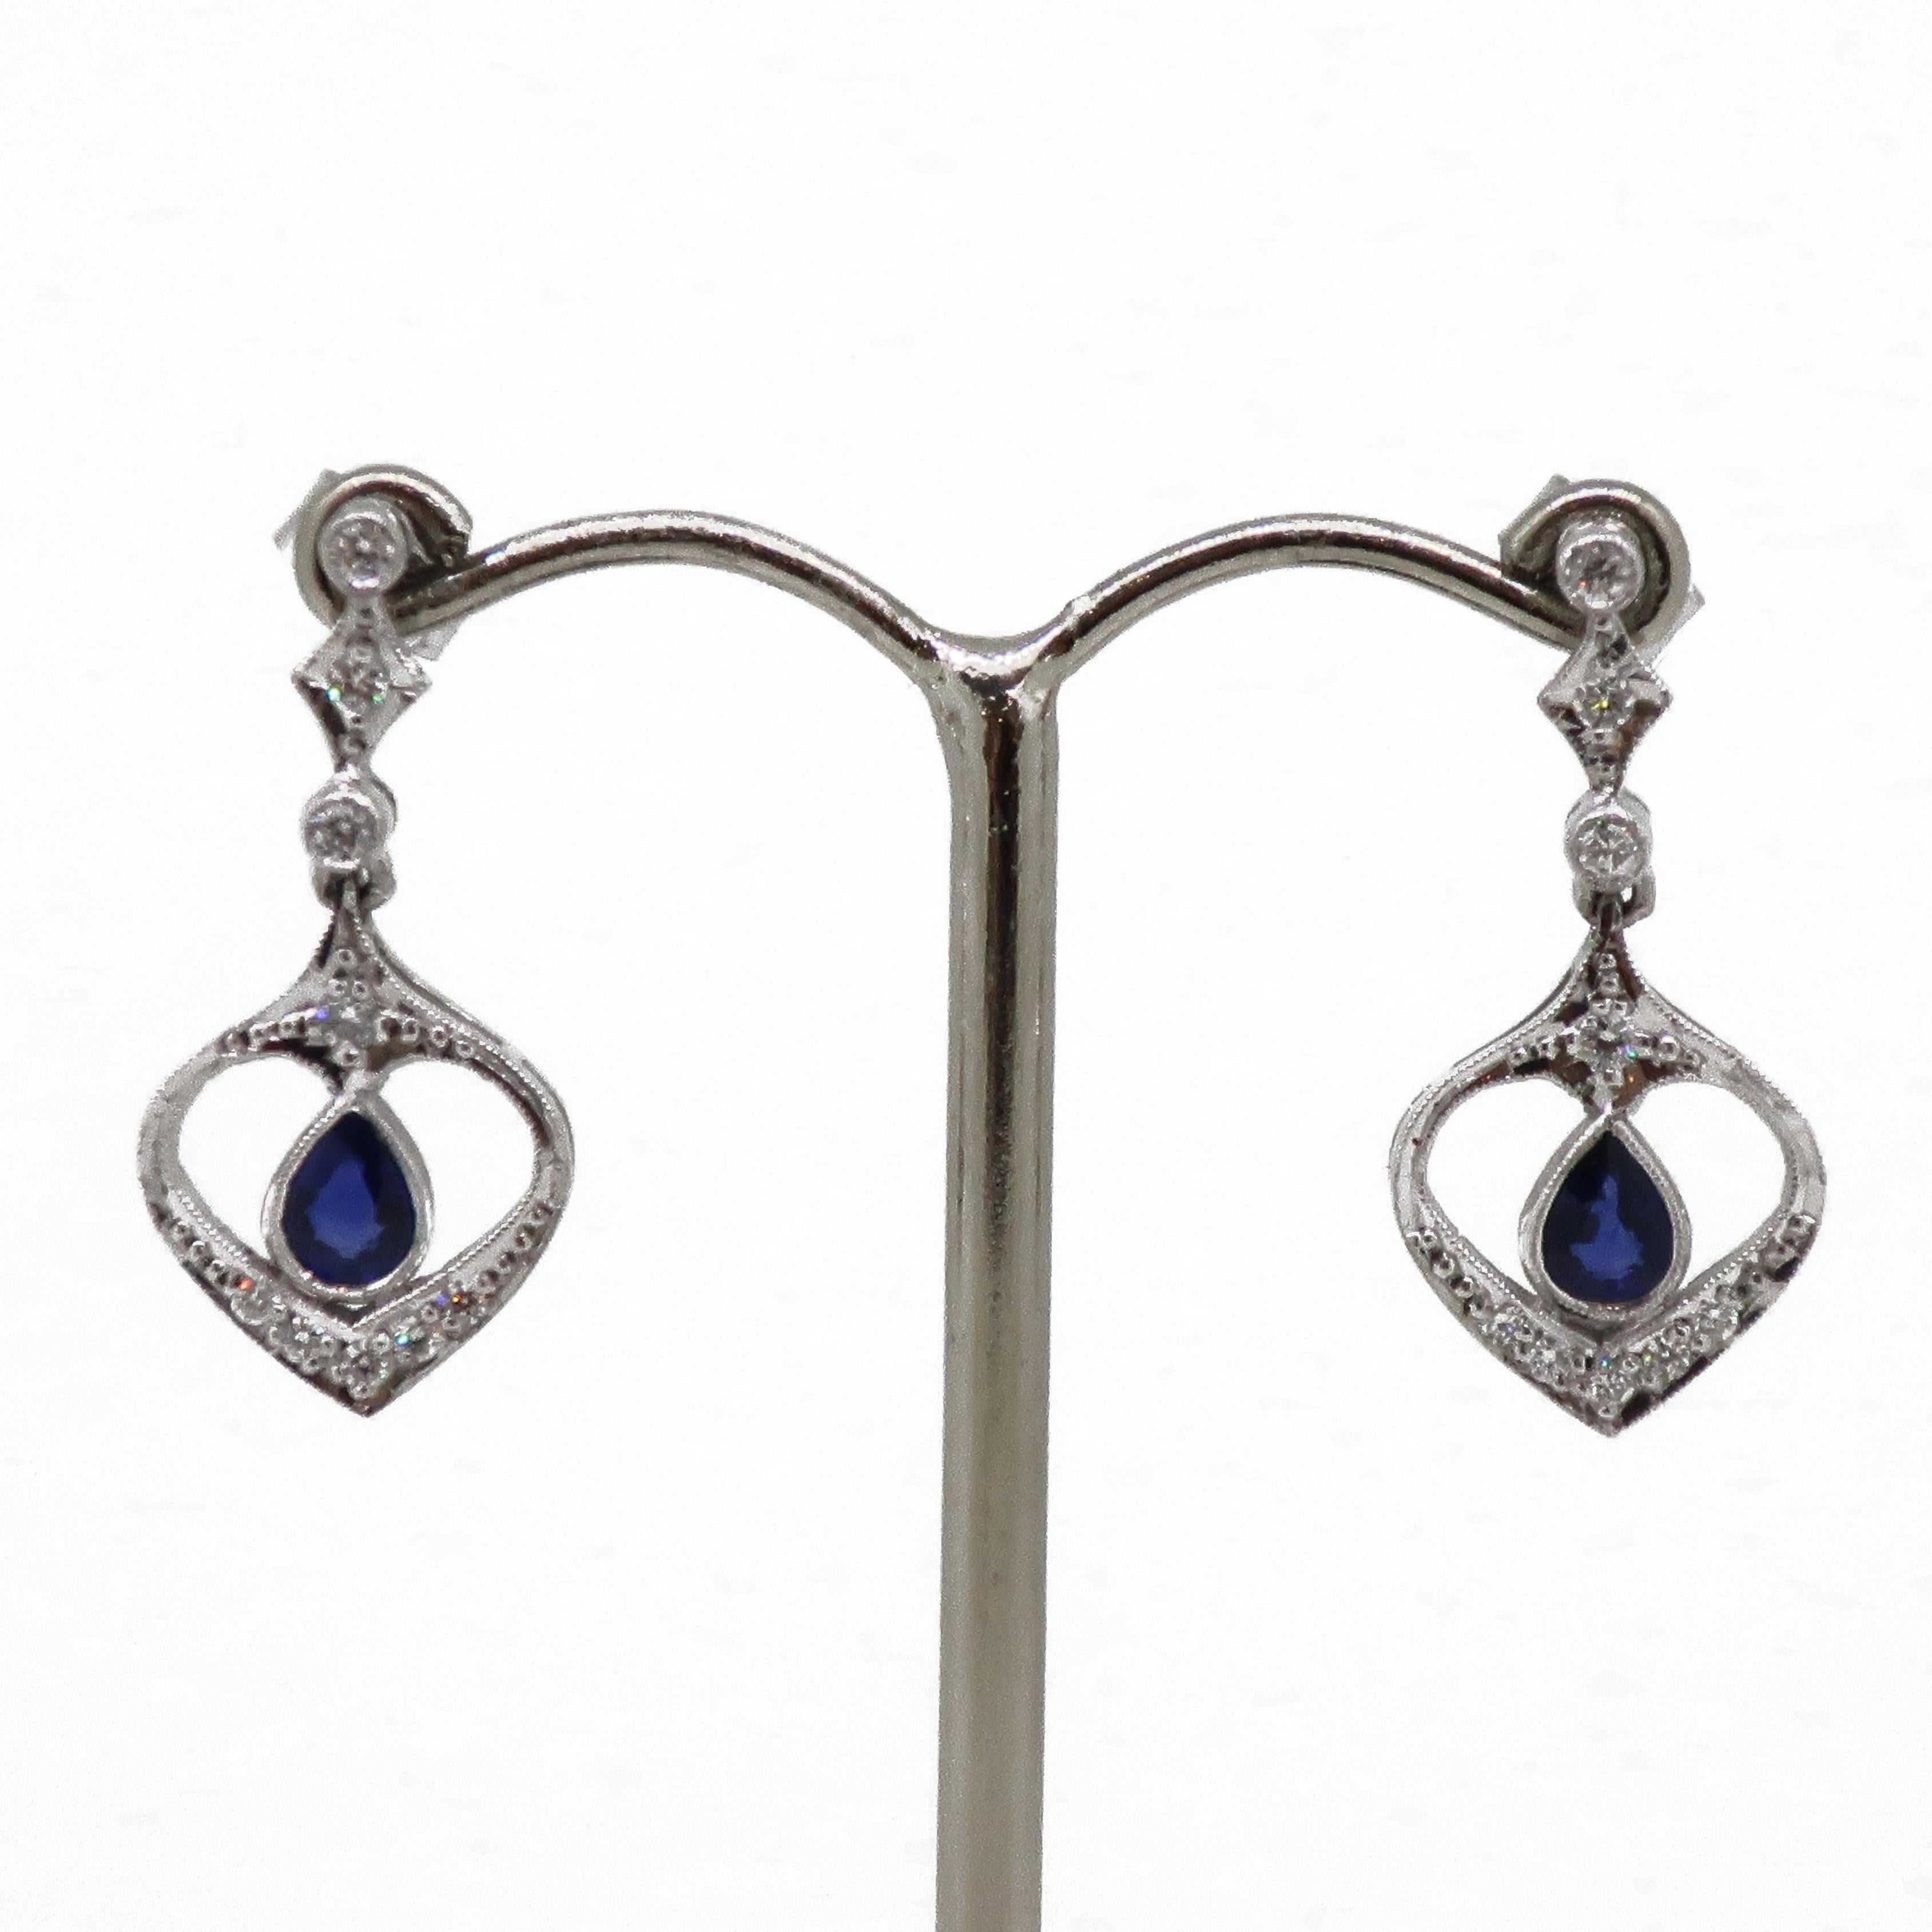 Sapphire And Diamond Drop Earrings 18 Karat White Gold 

Gorgeous sapphire and diamond drop earrings in a Art Deco design. The earrings consist of a pear shape sapphire in a open framework with brilliant cut diamonds surrounding them, with a diamond